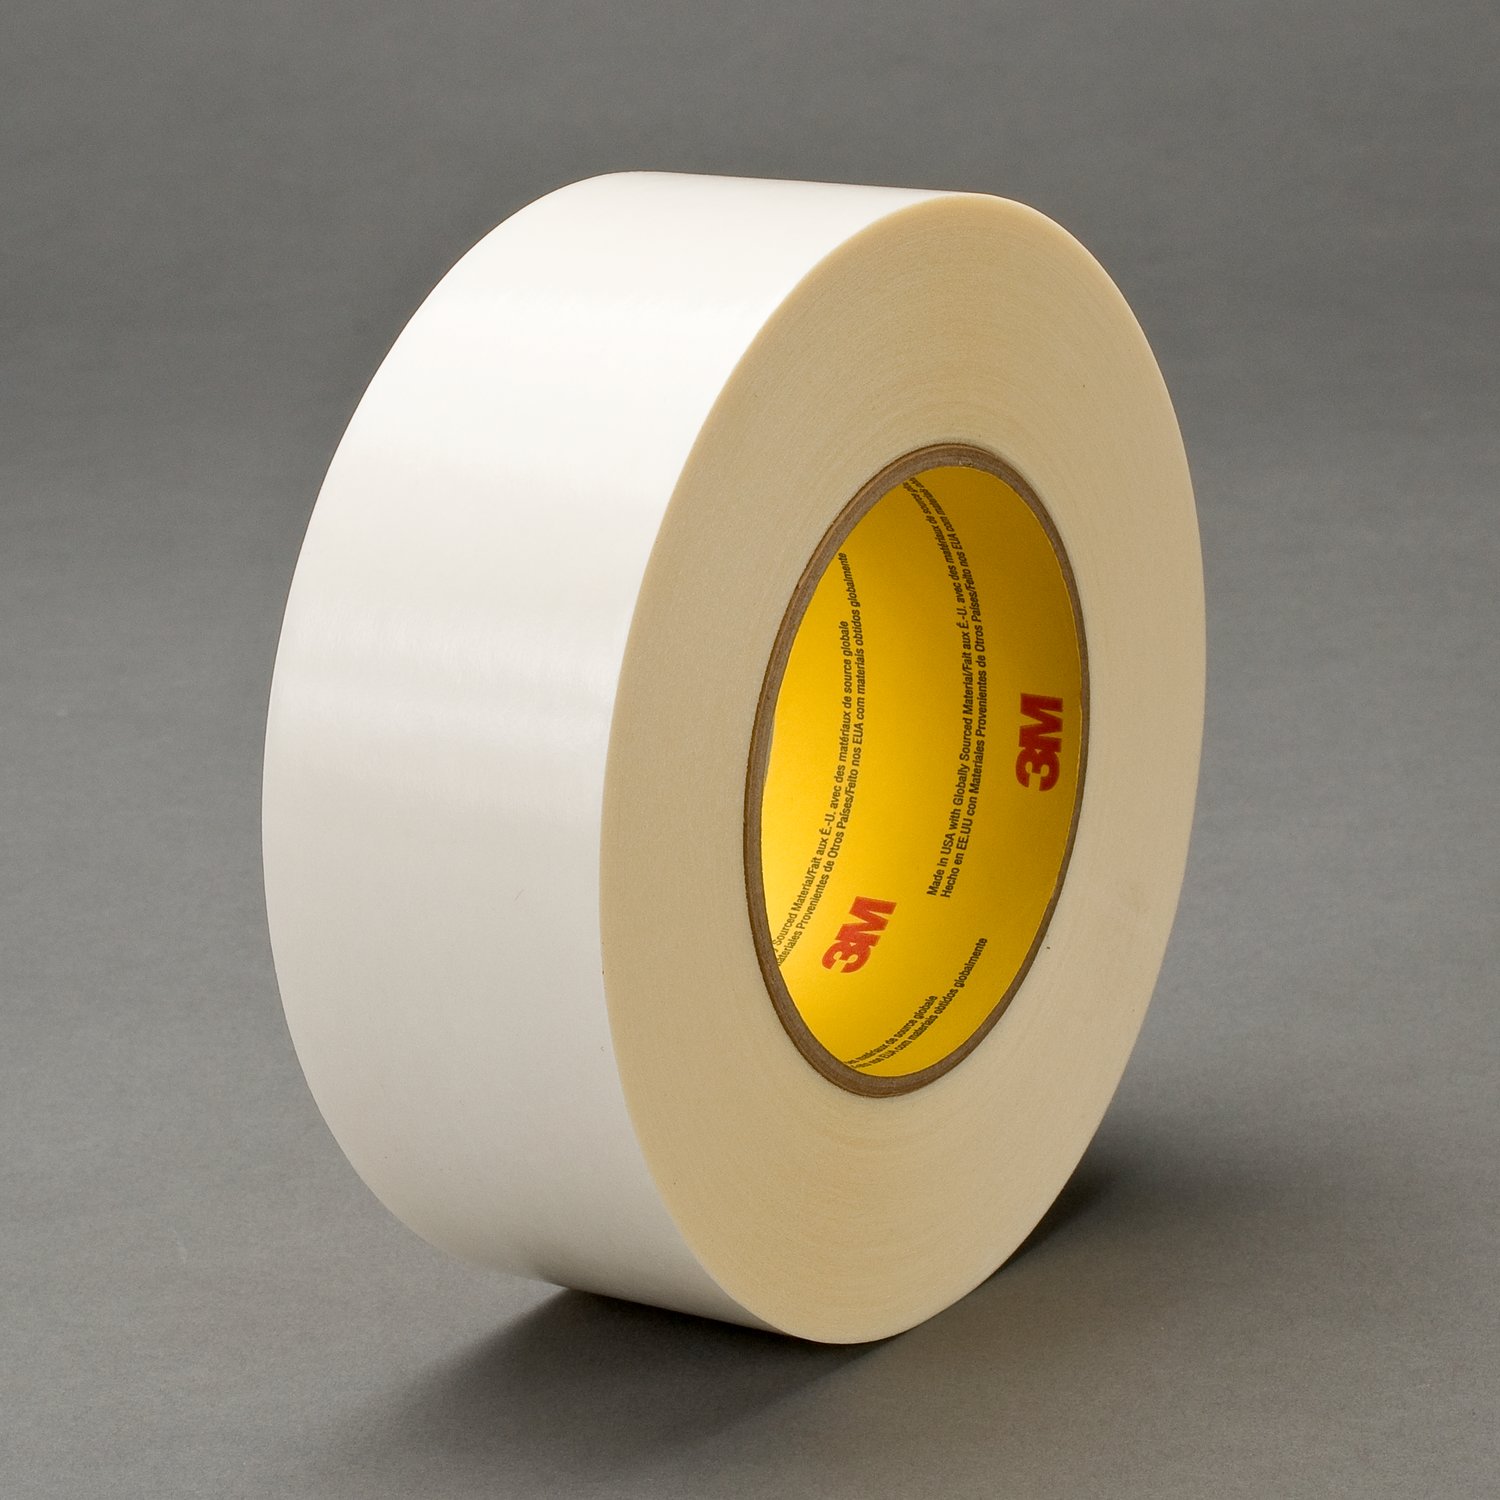 7000124666 - 3M Double Coated Tape 9740, Clear, 72 mm x 55 m, 3.5 mil, 16 rolls per
case